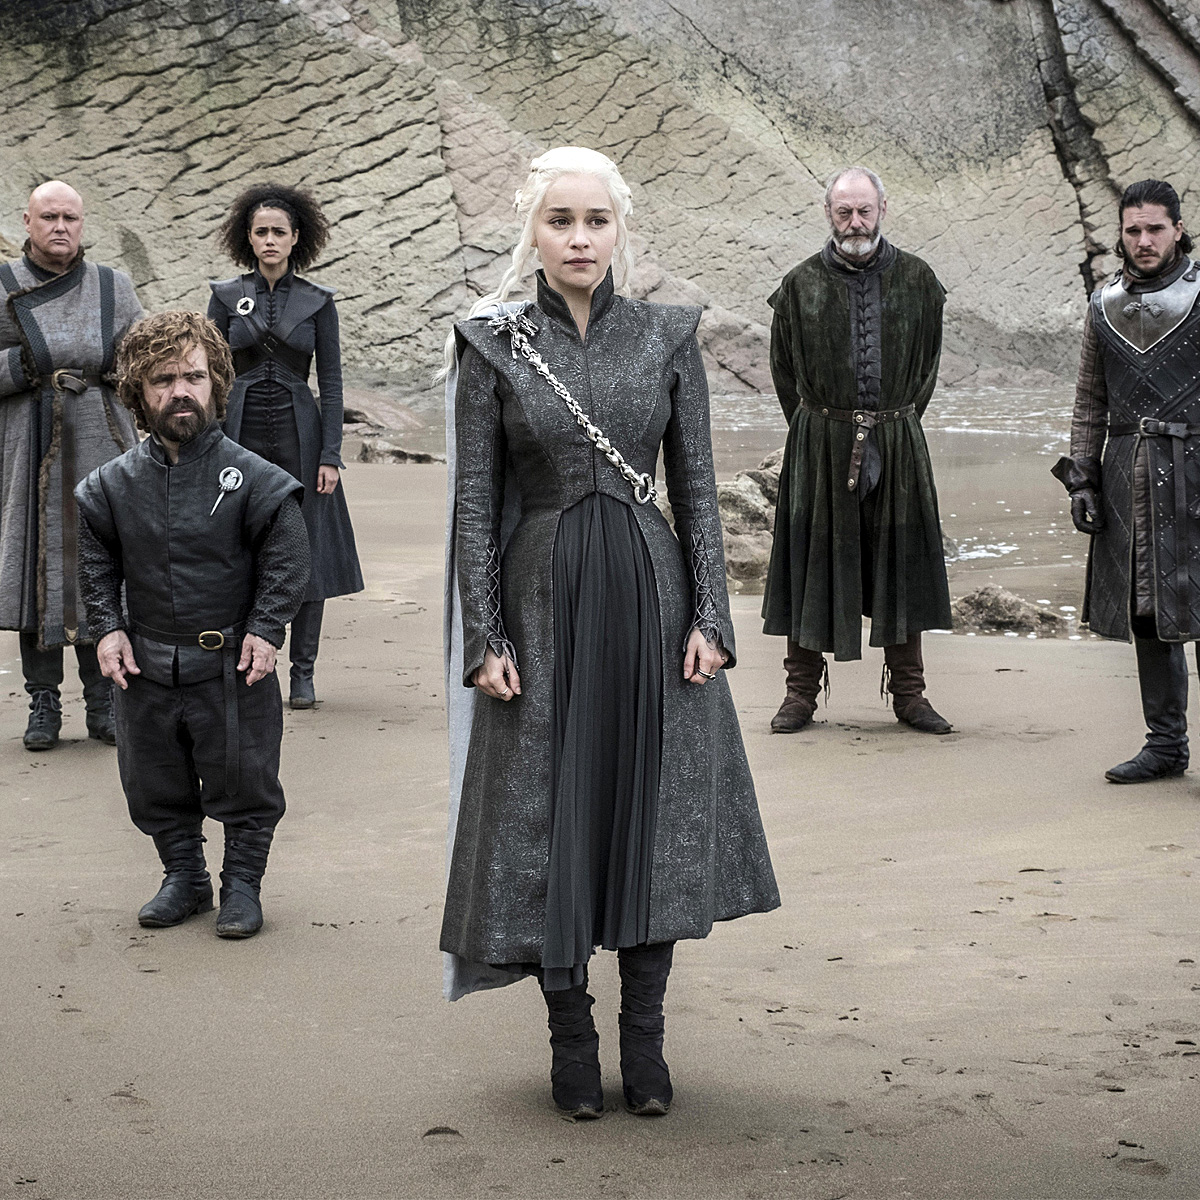 Everything Shared About the Targaryens' Past in Game of Thrones